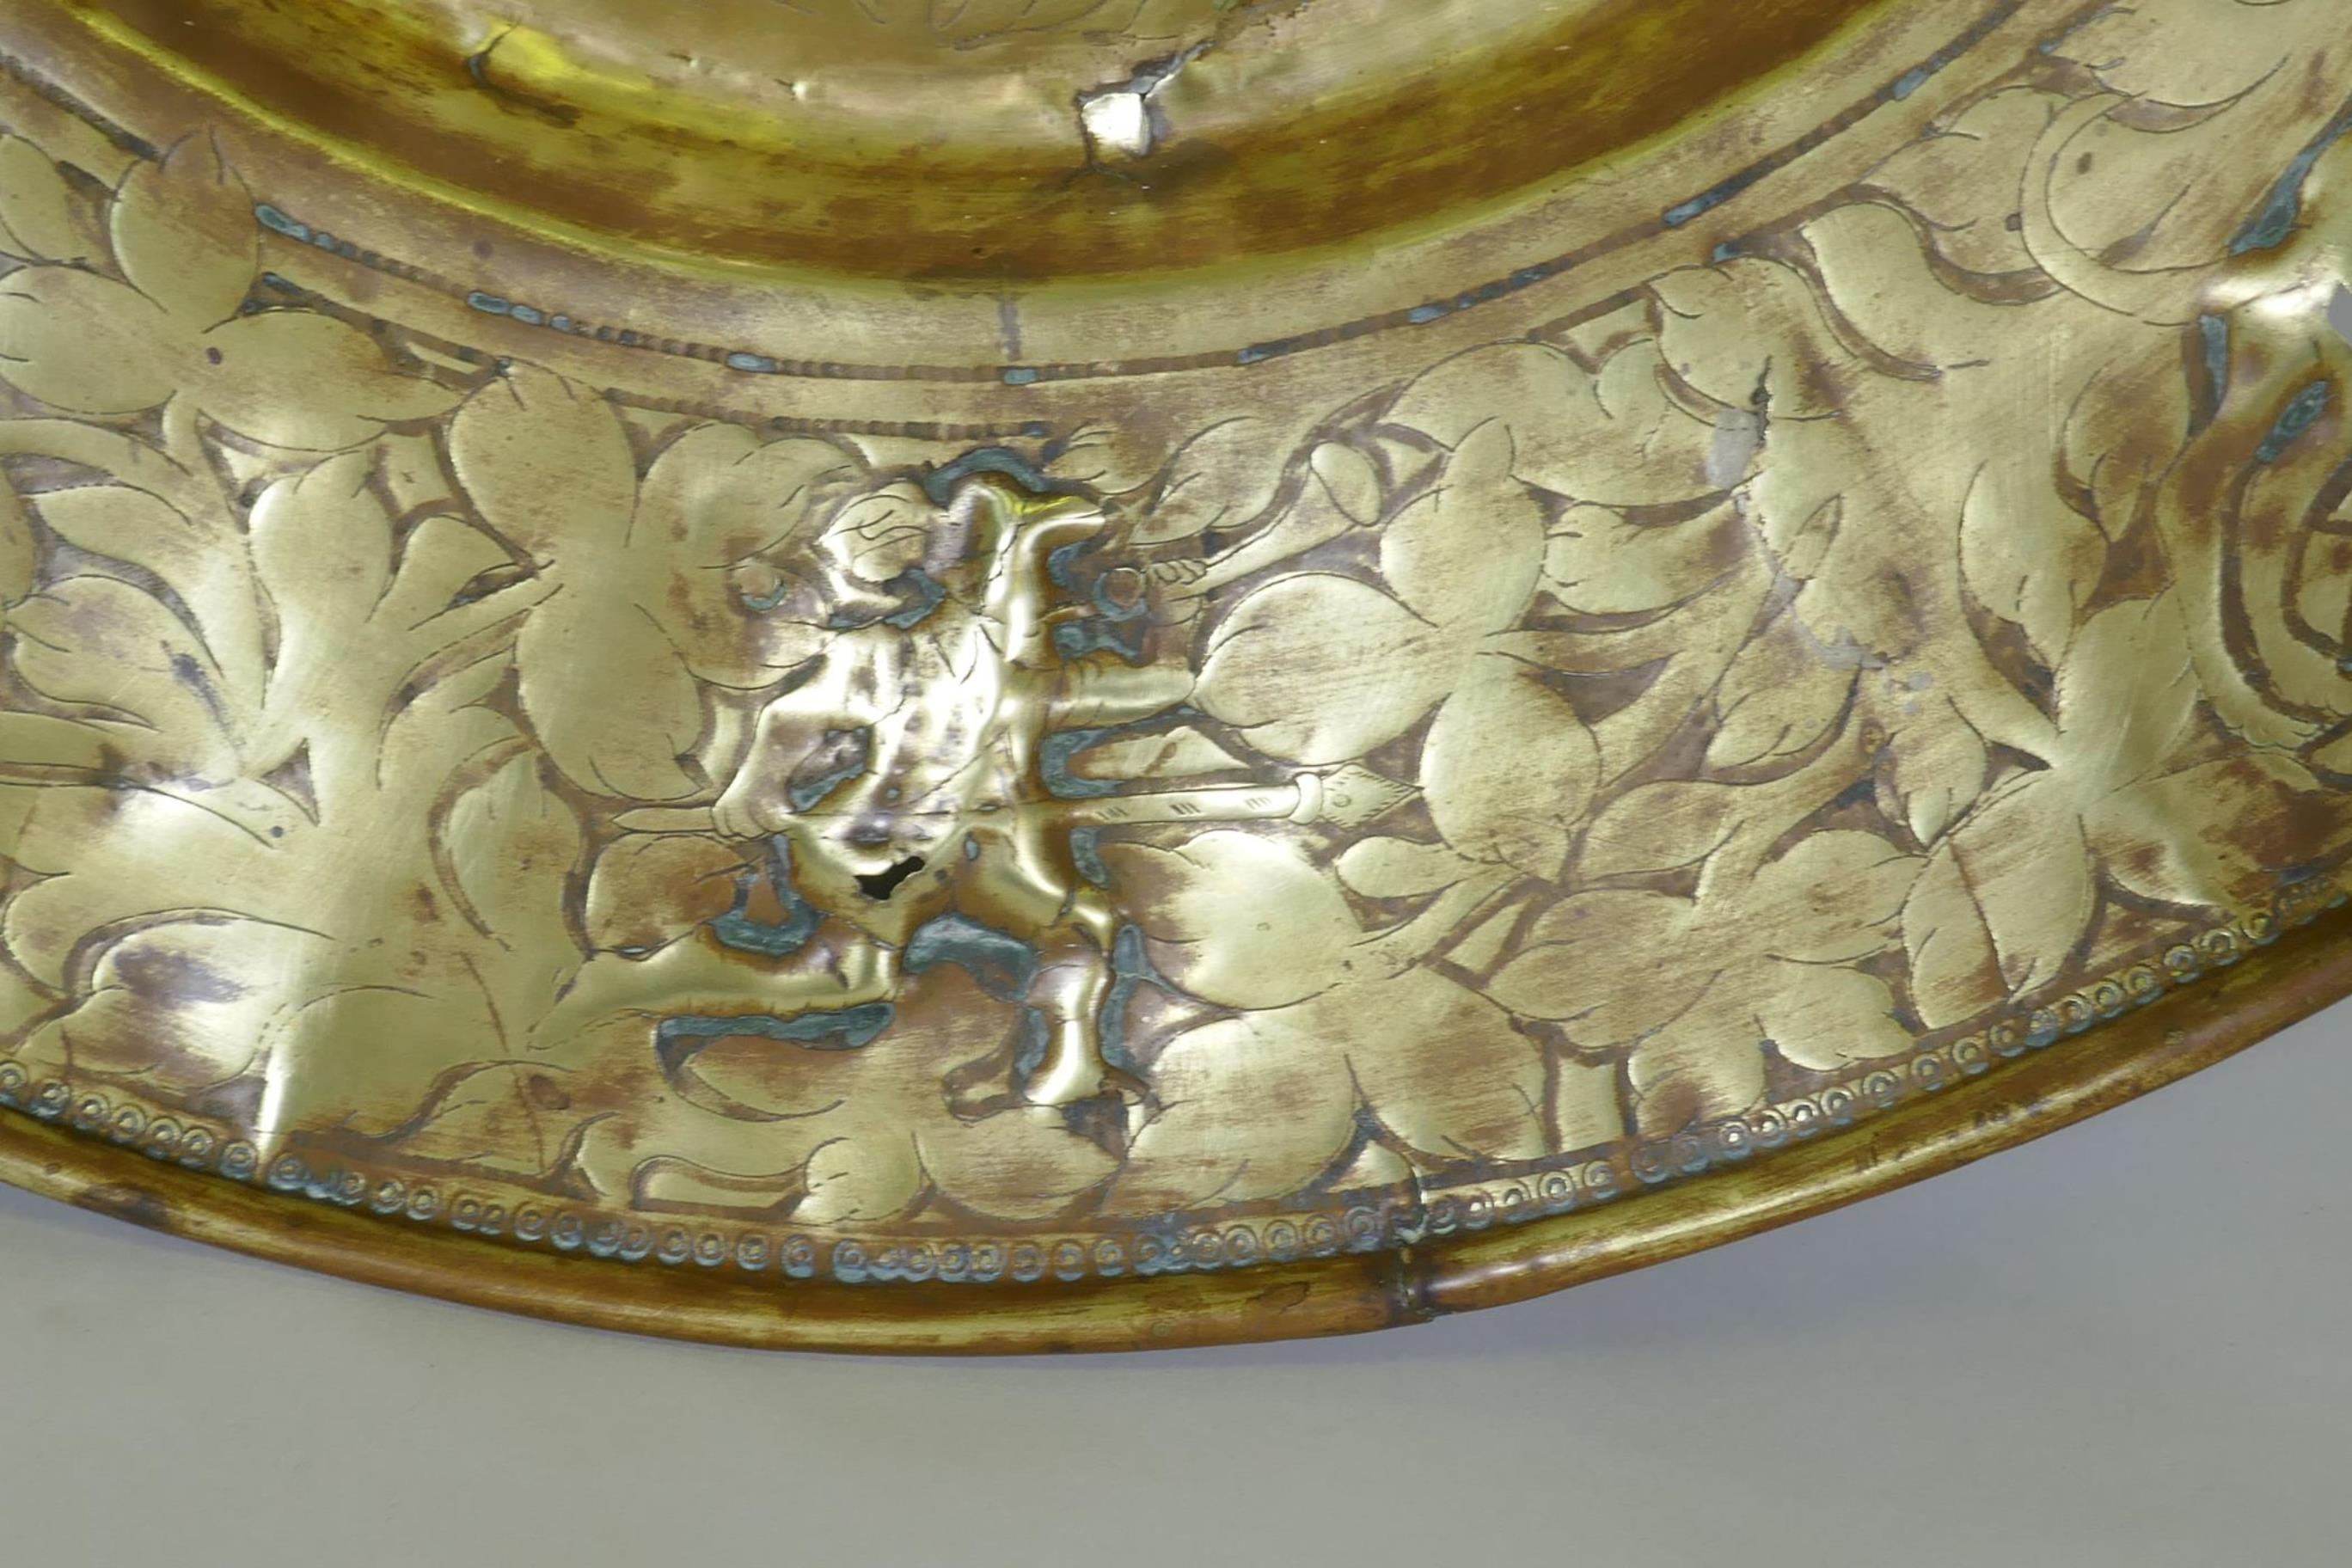 A Nuremburg brass alms dish, the central field with a depiction of Adam and Eve with the Tree of - Image 3 of 3